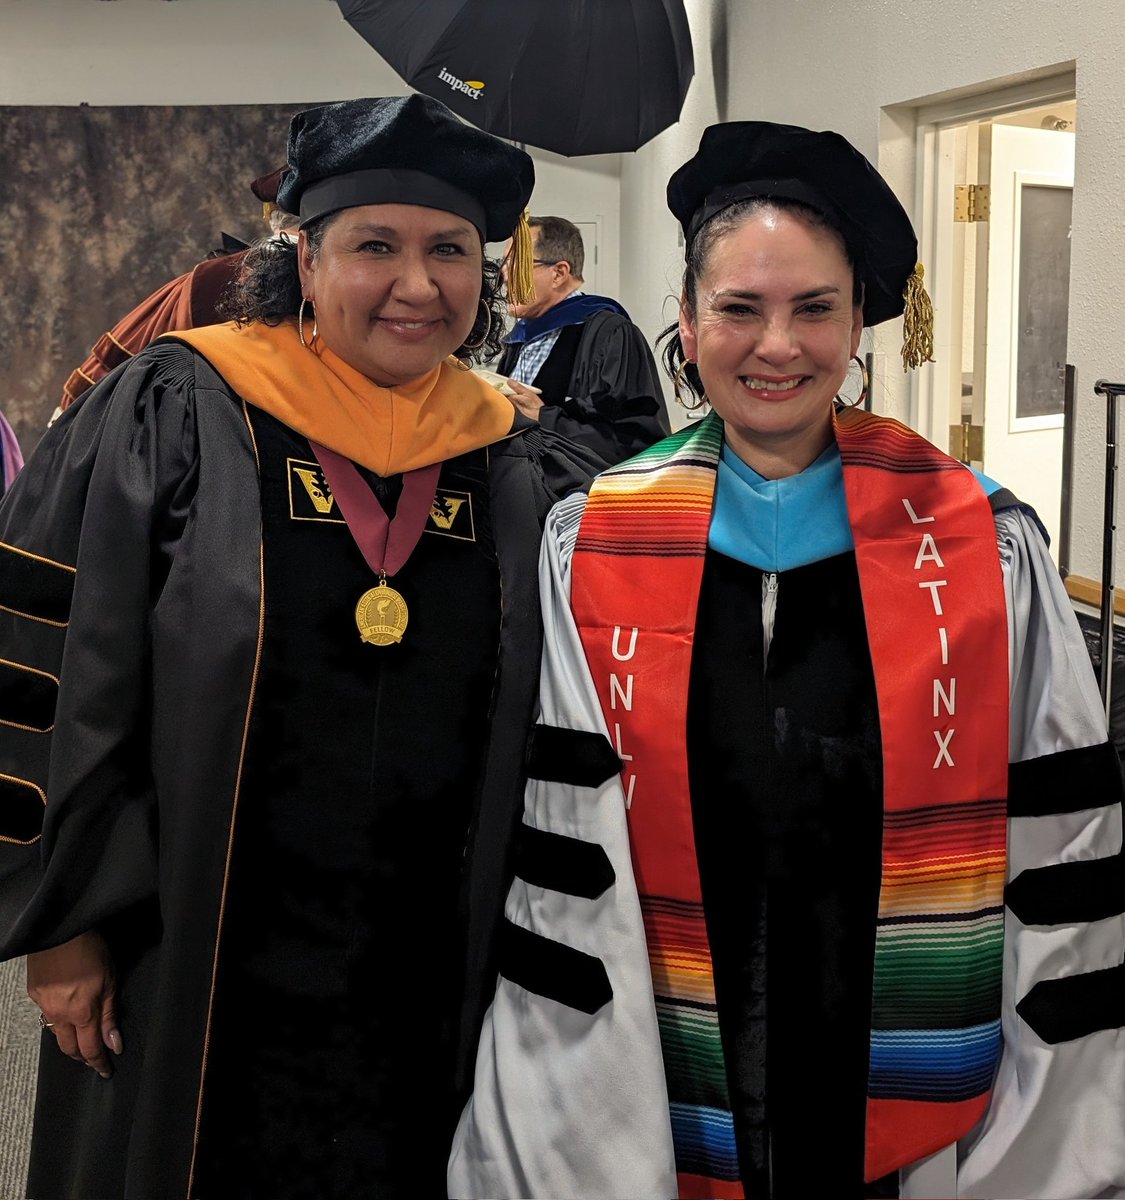 With the fabulous Regent @ExtraAdmin-had to get a pic with her awesome stole! #unlvlatinx @unlv @UNLVnursing